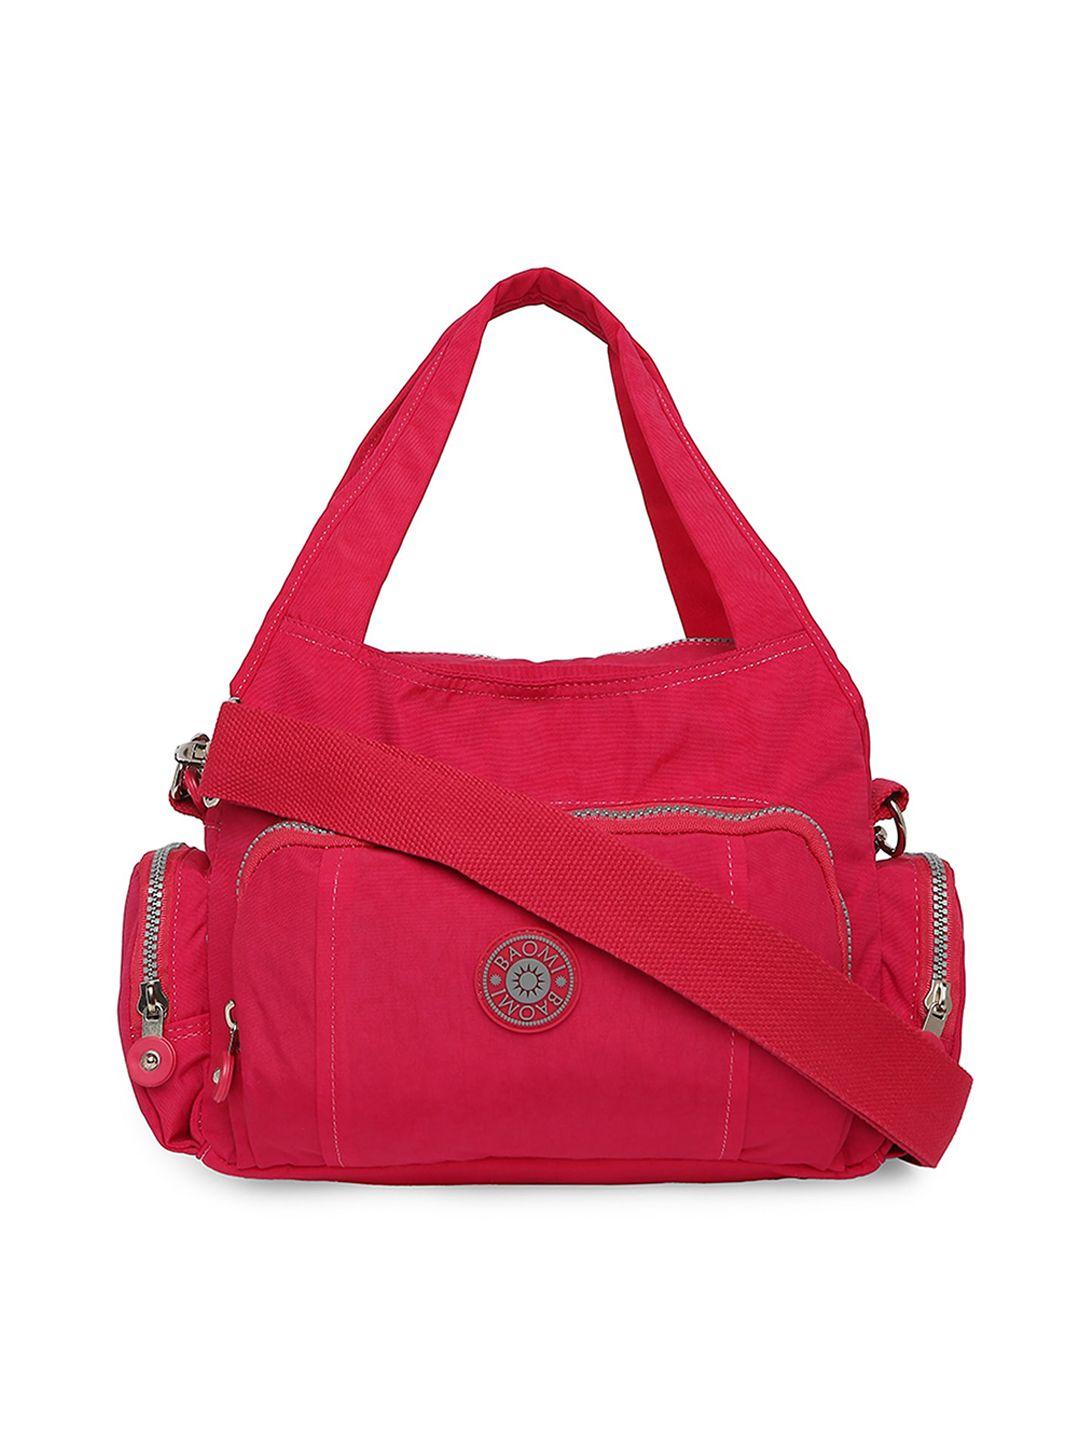 baomi red structured handheld bag with applique